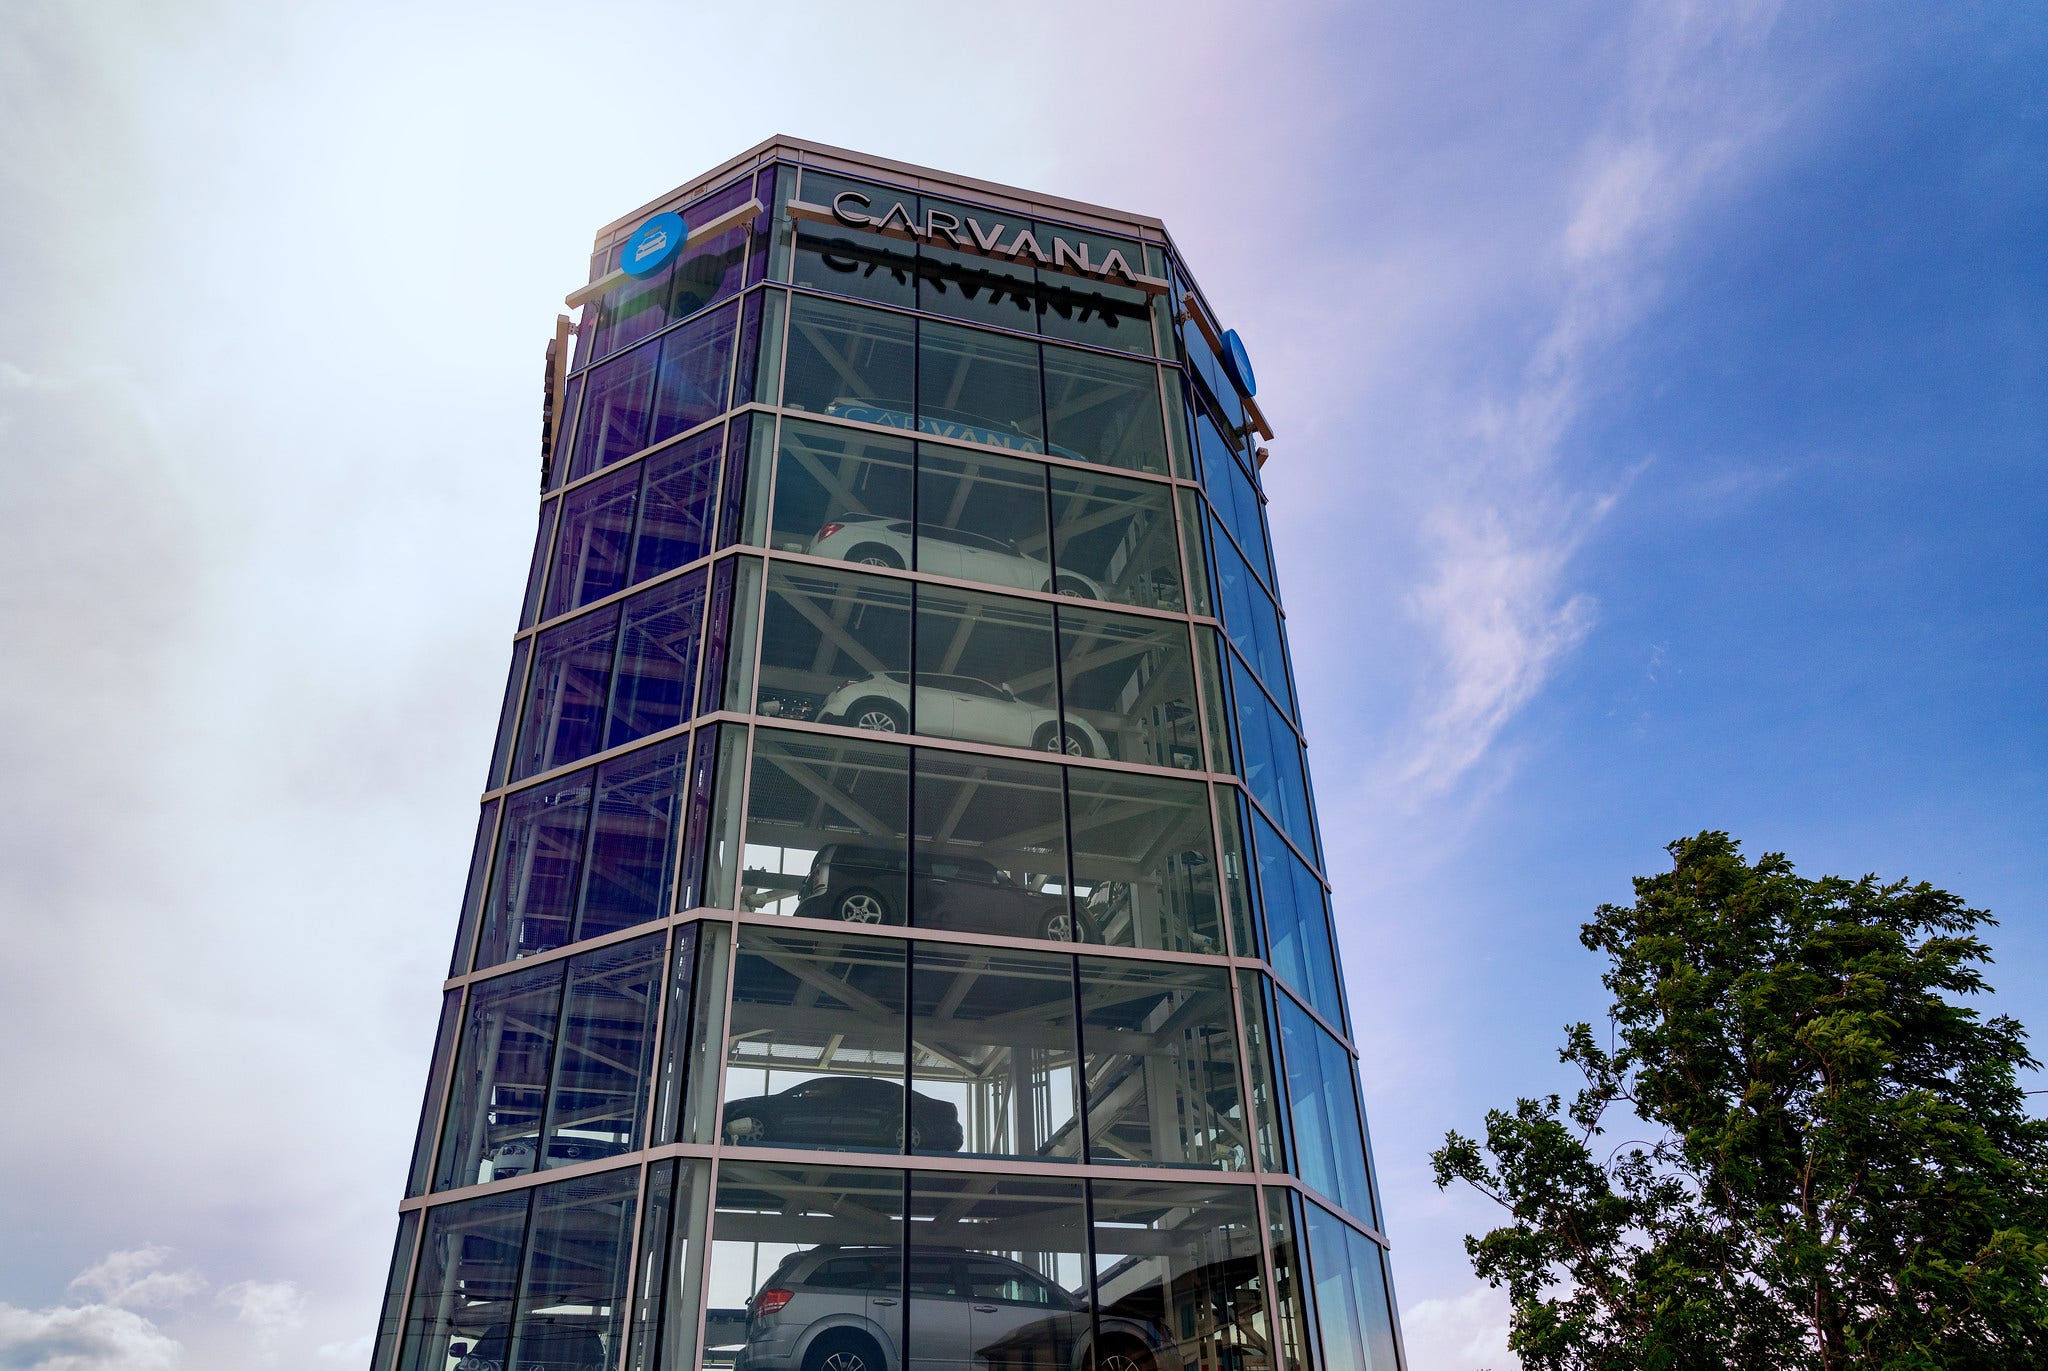 Carvana Stock Continues To Slide: What's Going On?